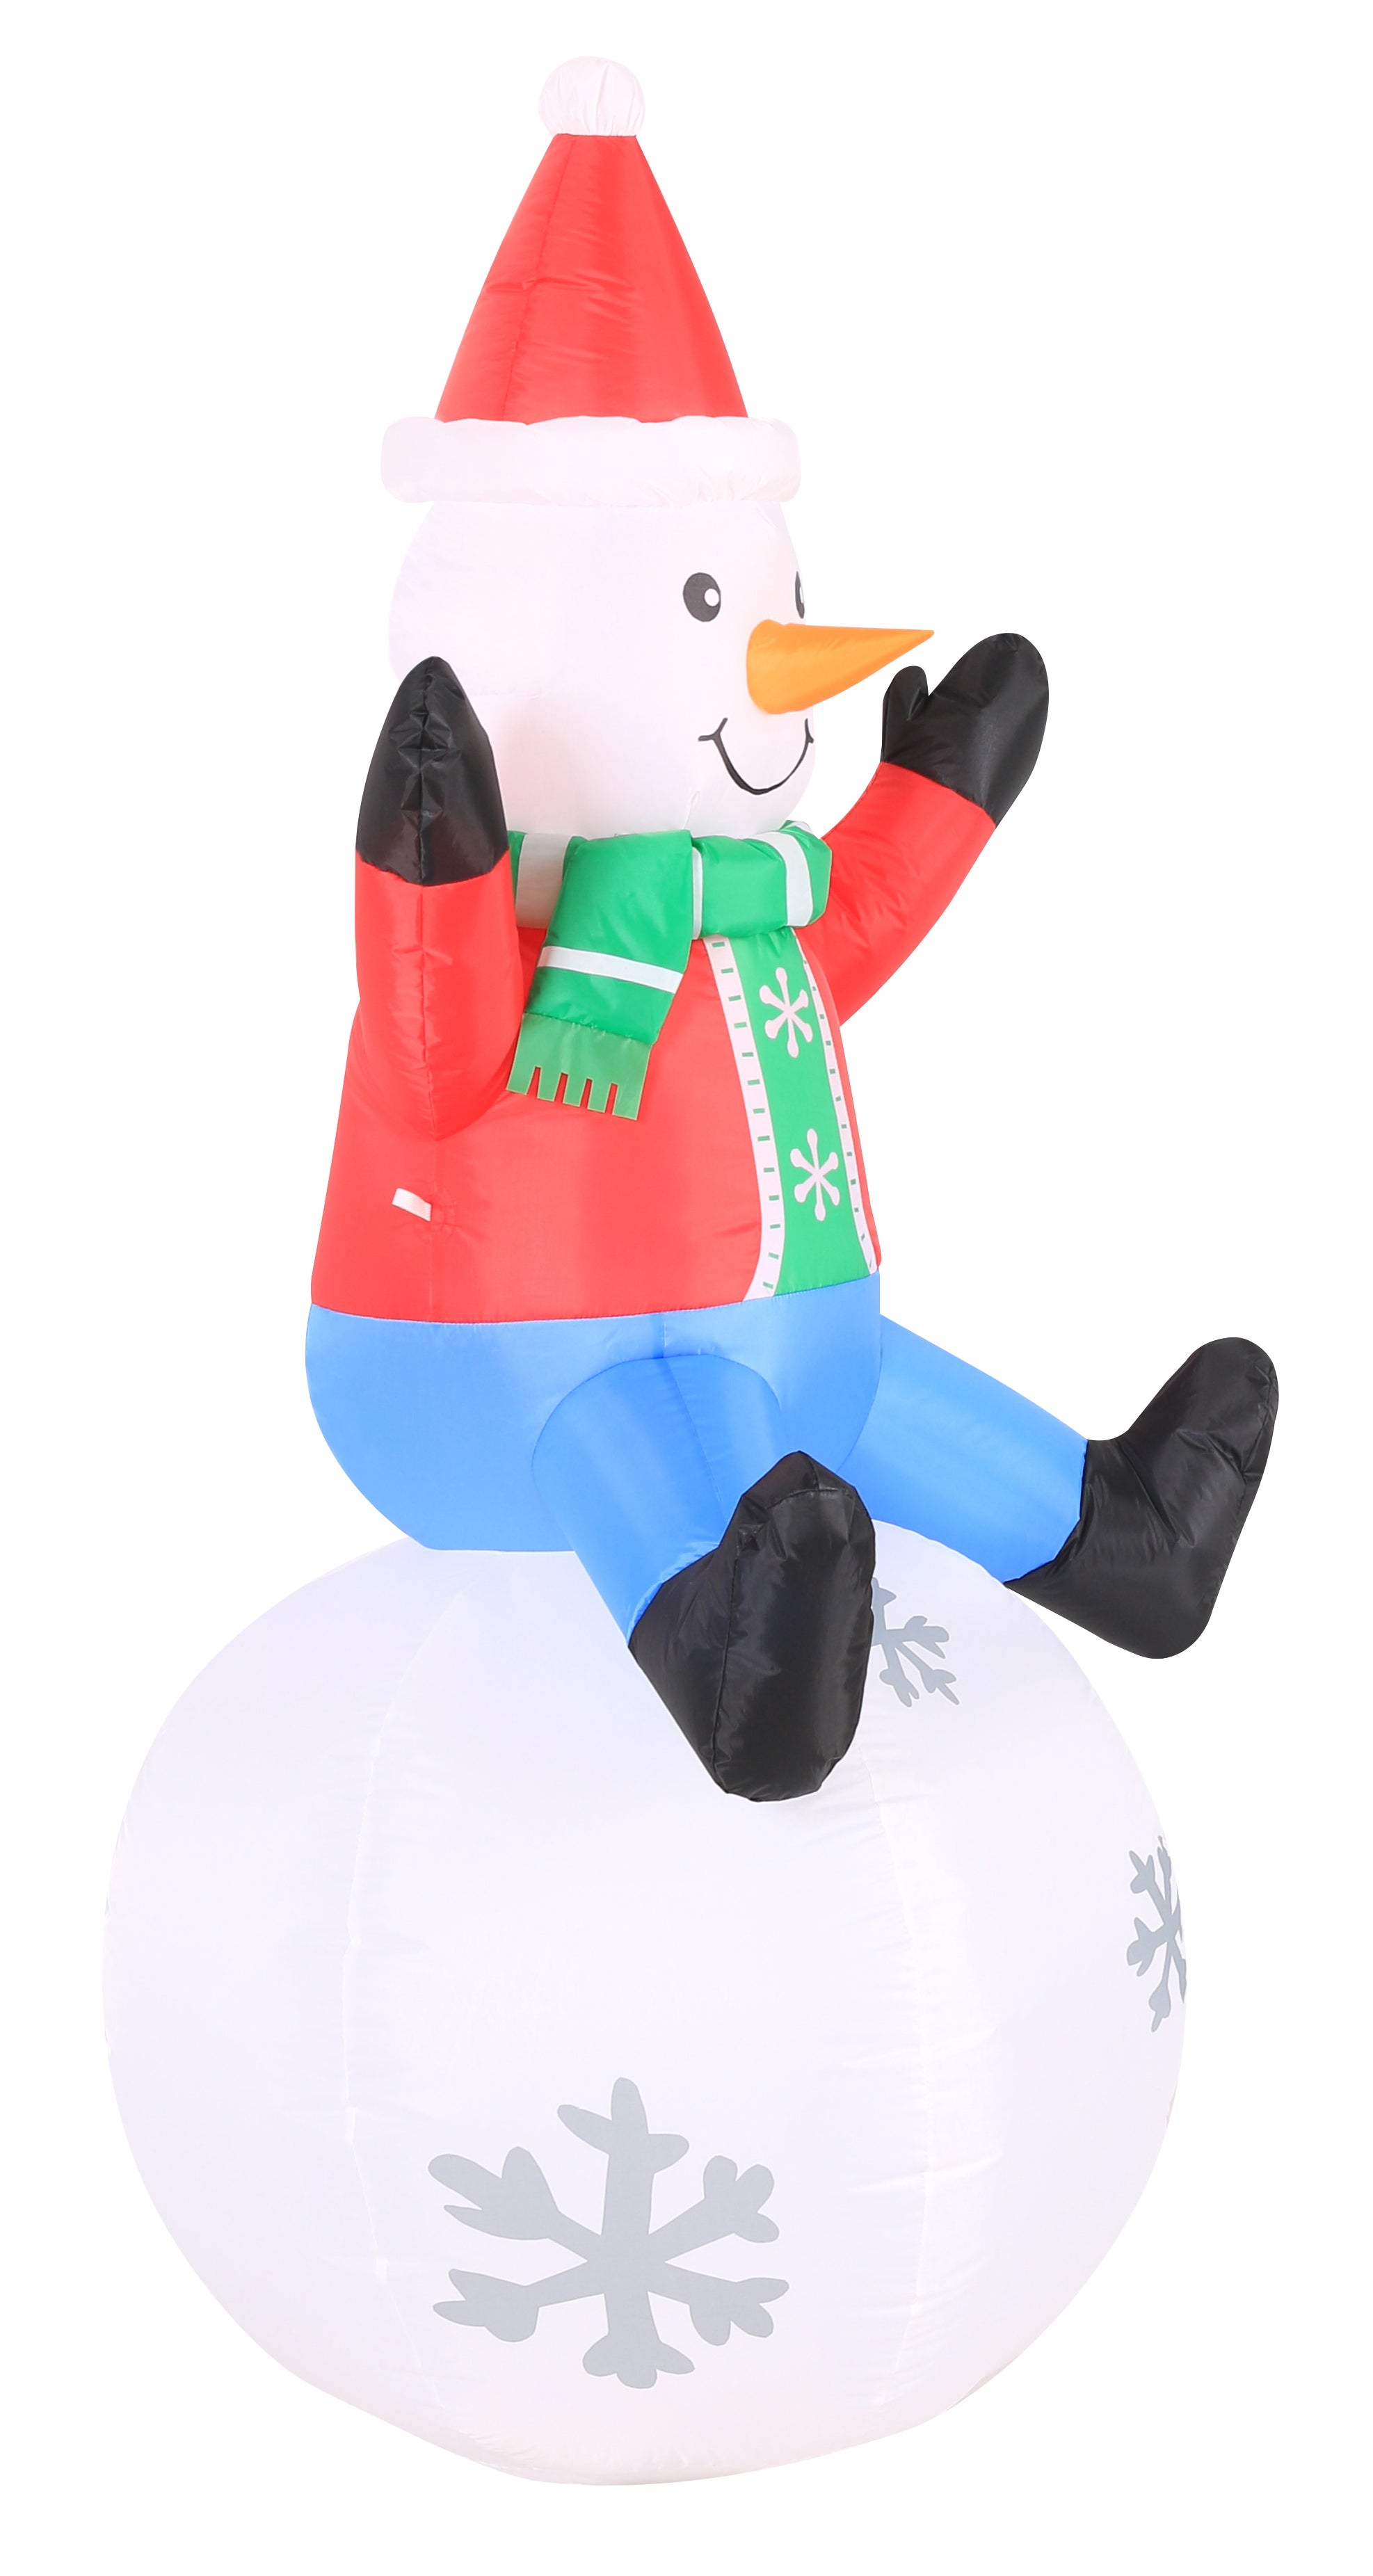 Occasions 5' INFLATABLE SNOWMAN ON SWIRLING LIGHTS SNOWBALL,  Tall, Multicolored